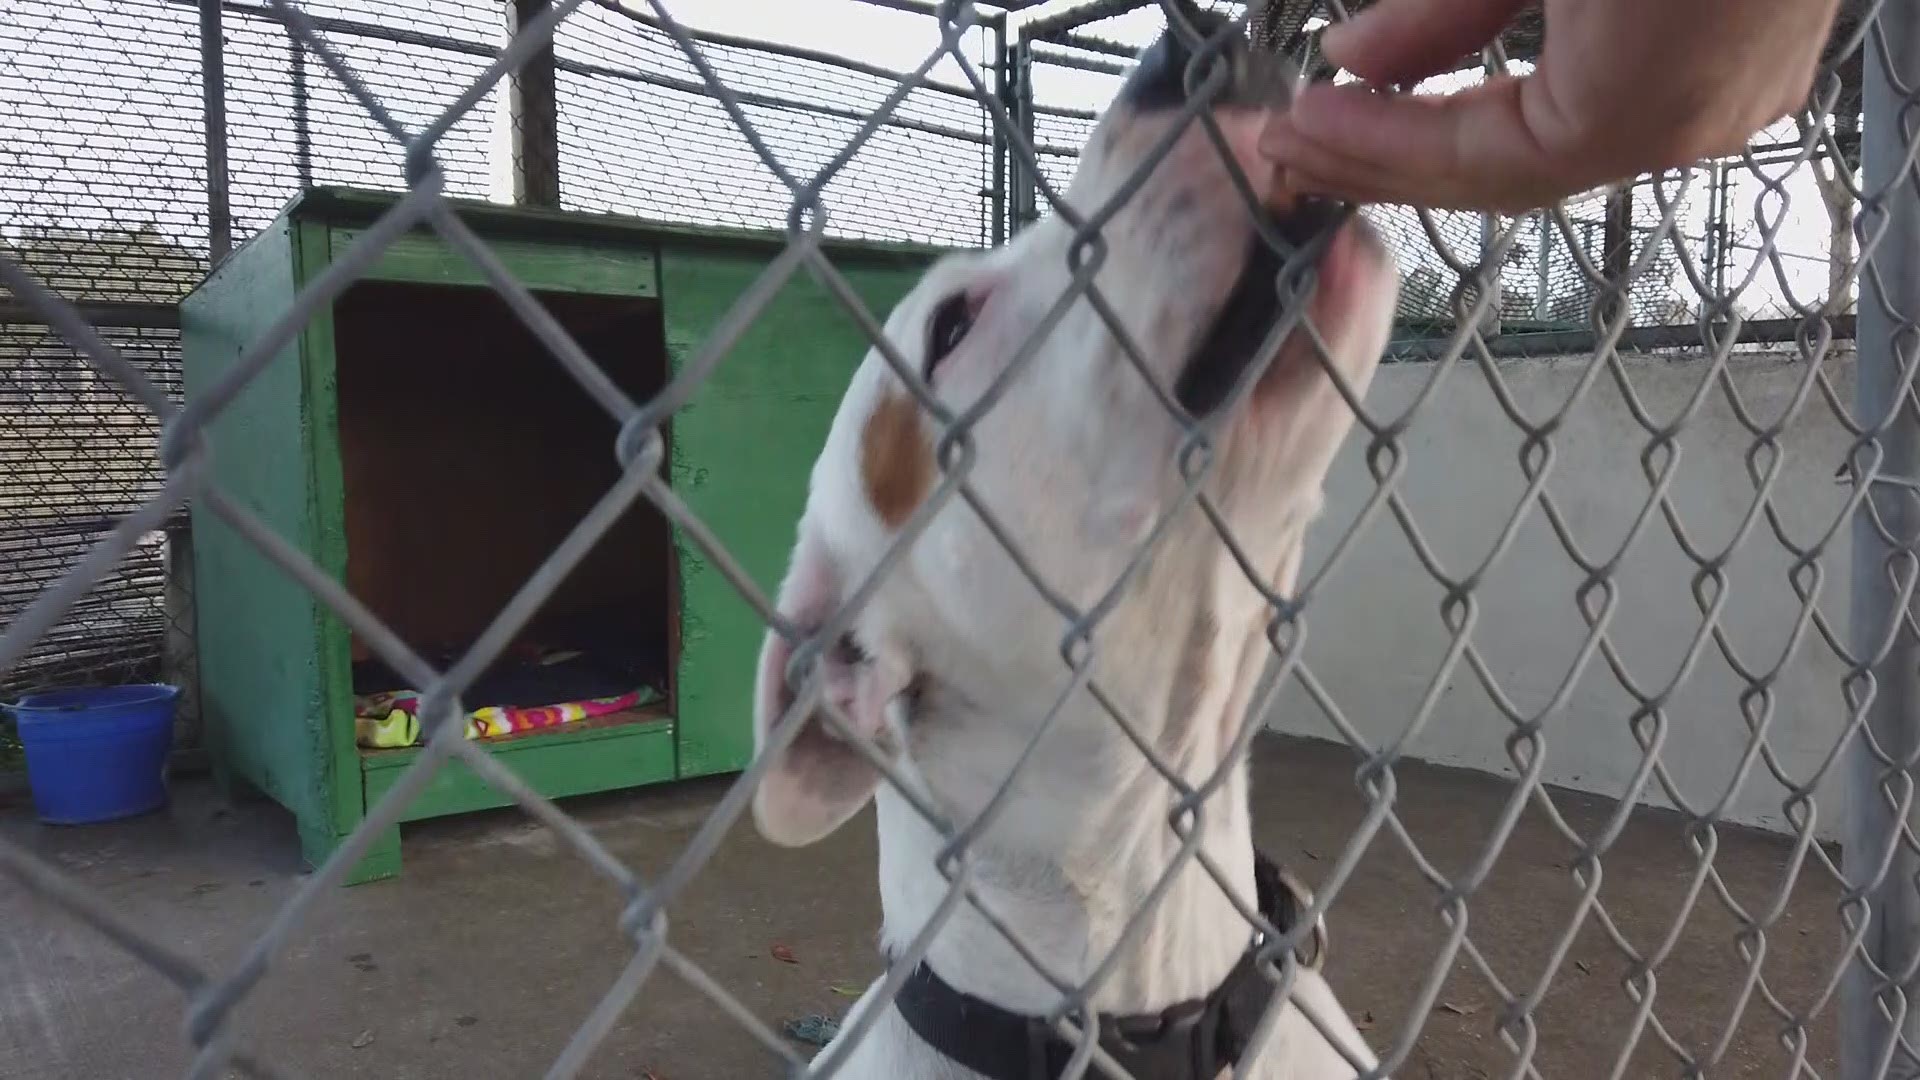 Kris Rotonda is spending a few nights in a kennel at the Humane Society of Pasco County to help the pups there get adopted.